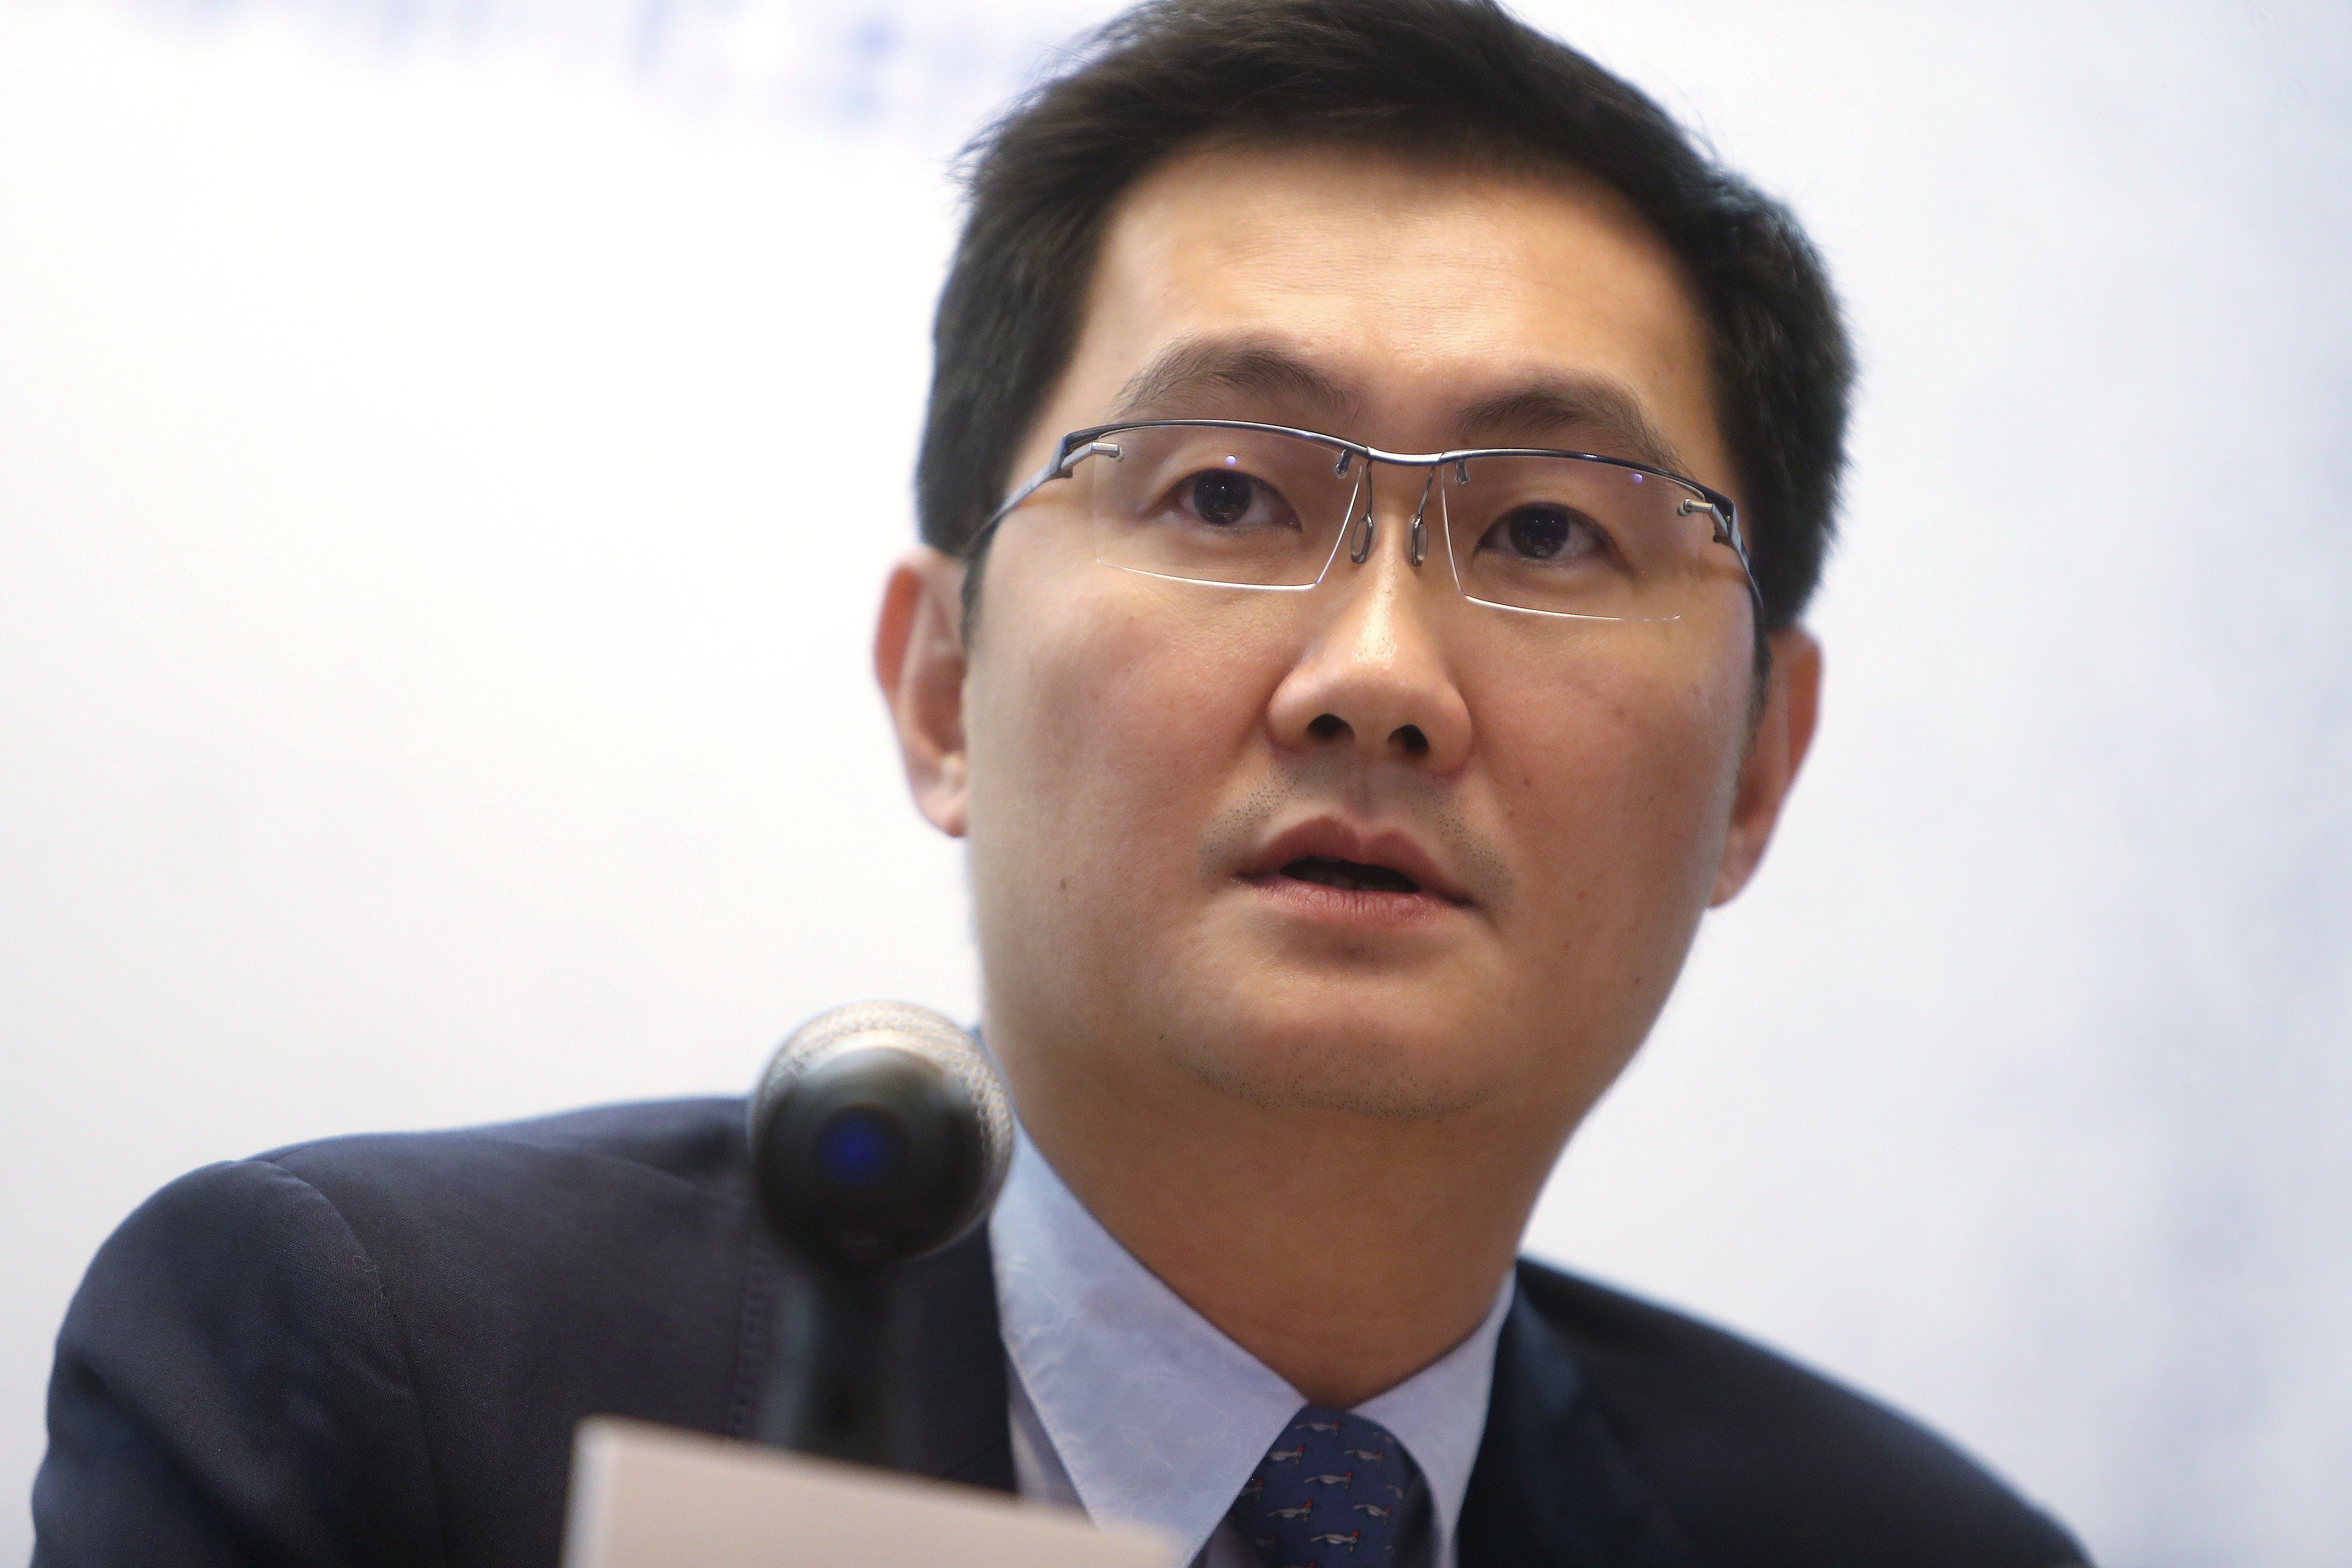 Tencent Holdings chairman and CEO Pony Ma Huateng has an estimated net worth of US$44.9 billion, according to CEOWORLD magazine’s rich list index for 2020. Photo: SCMP